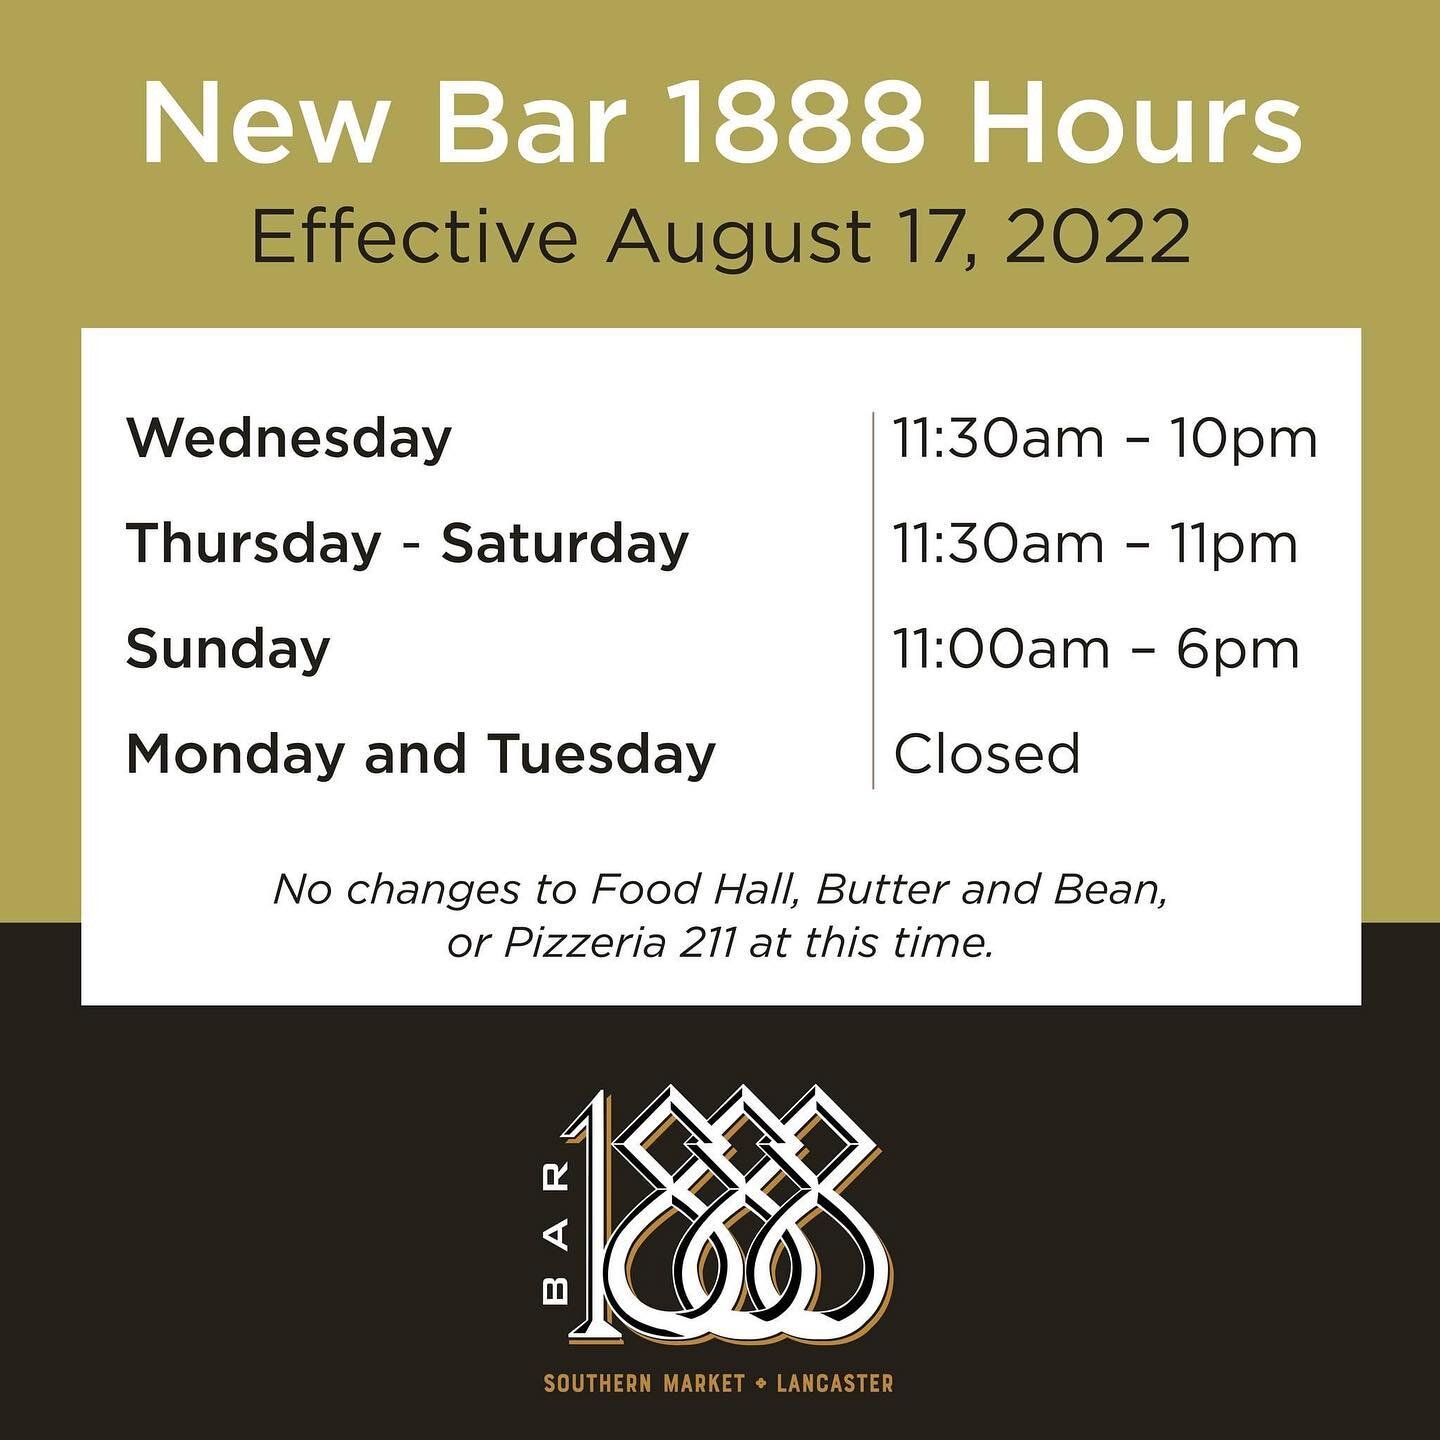 Check out our new hours⬆️
&bull;
&bull;
&bull;
#SouthernMarketLancaster #Bar1888 #FoodFriendsFun #Lancasterpa